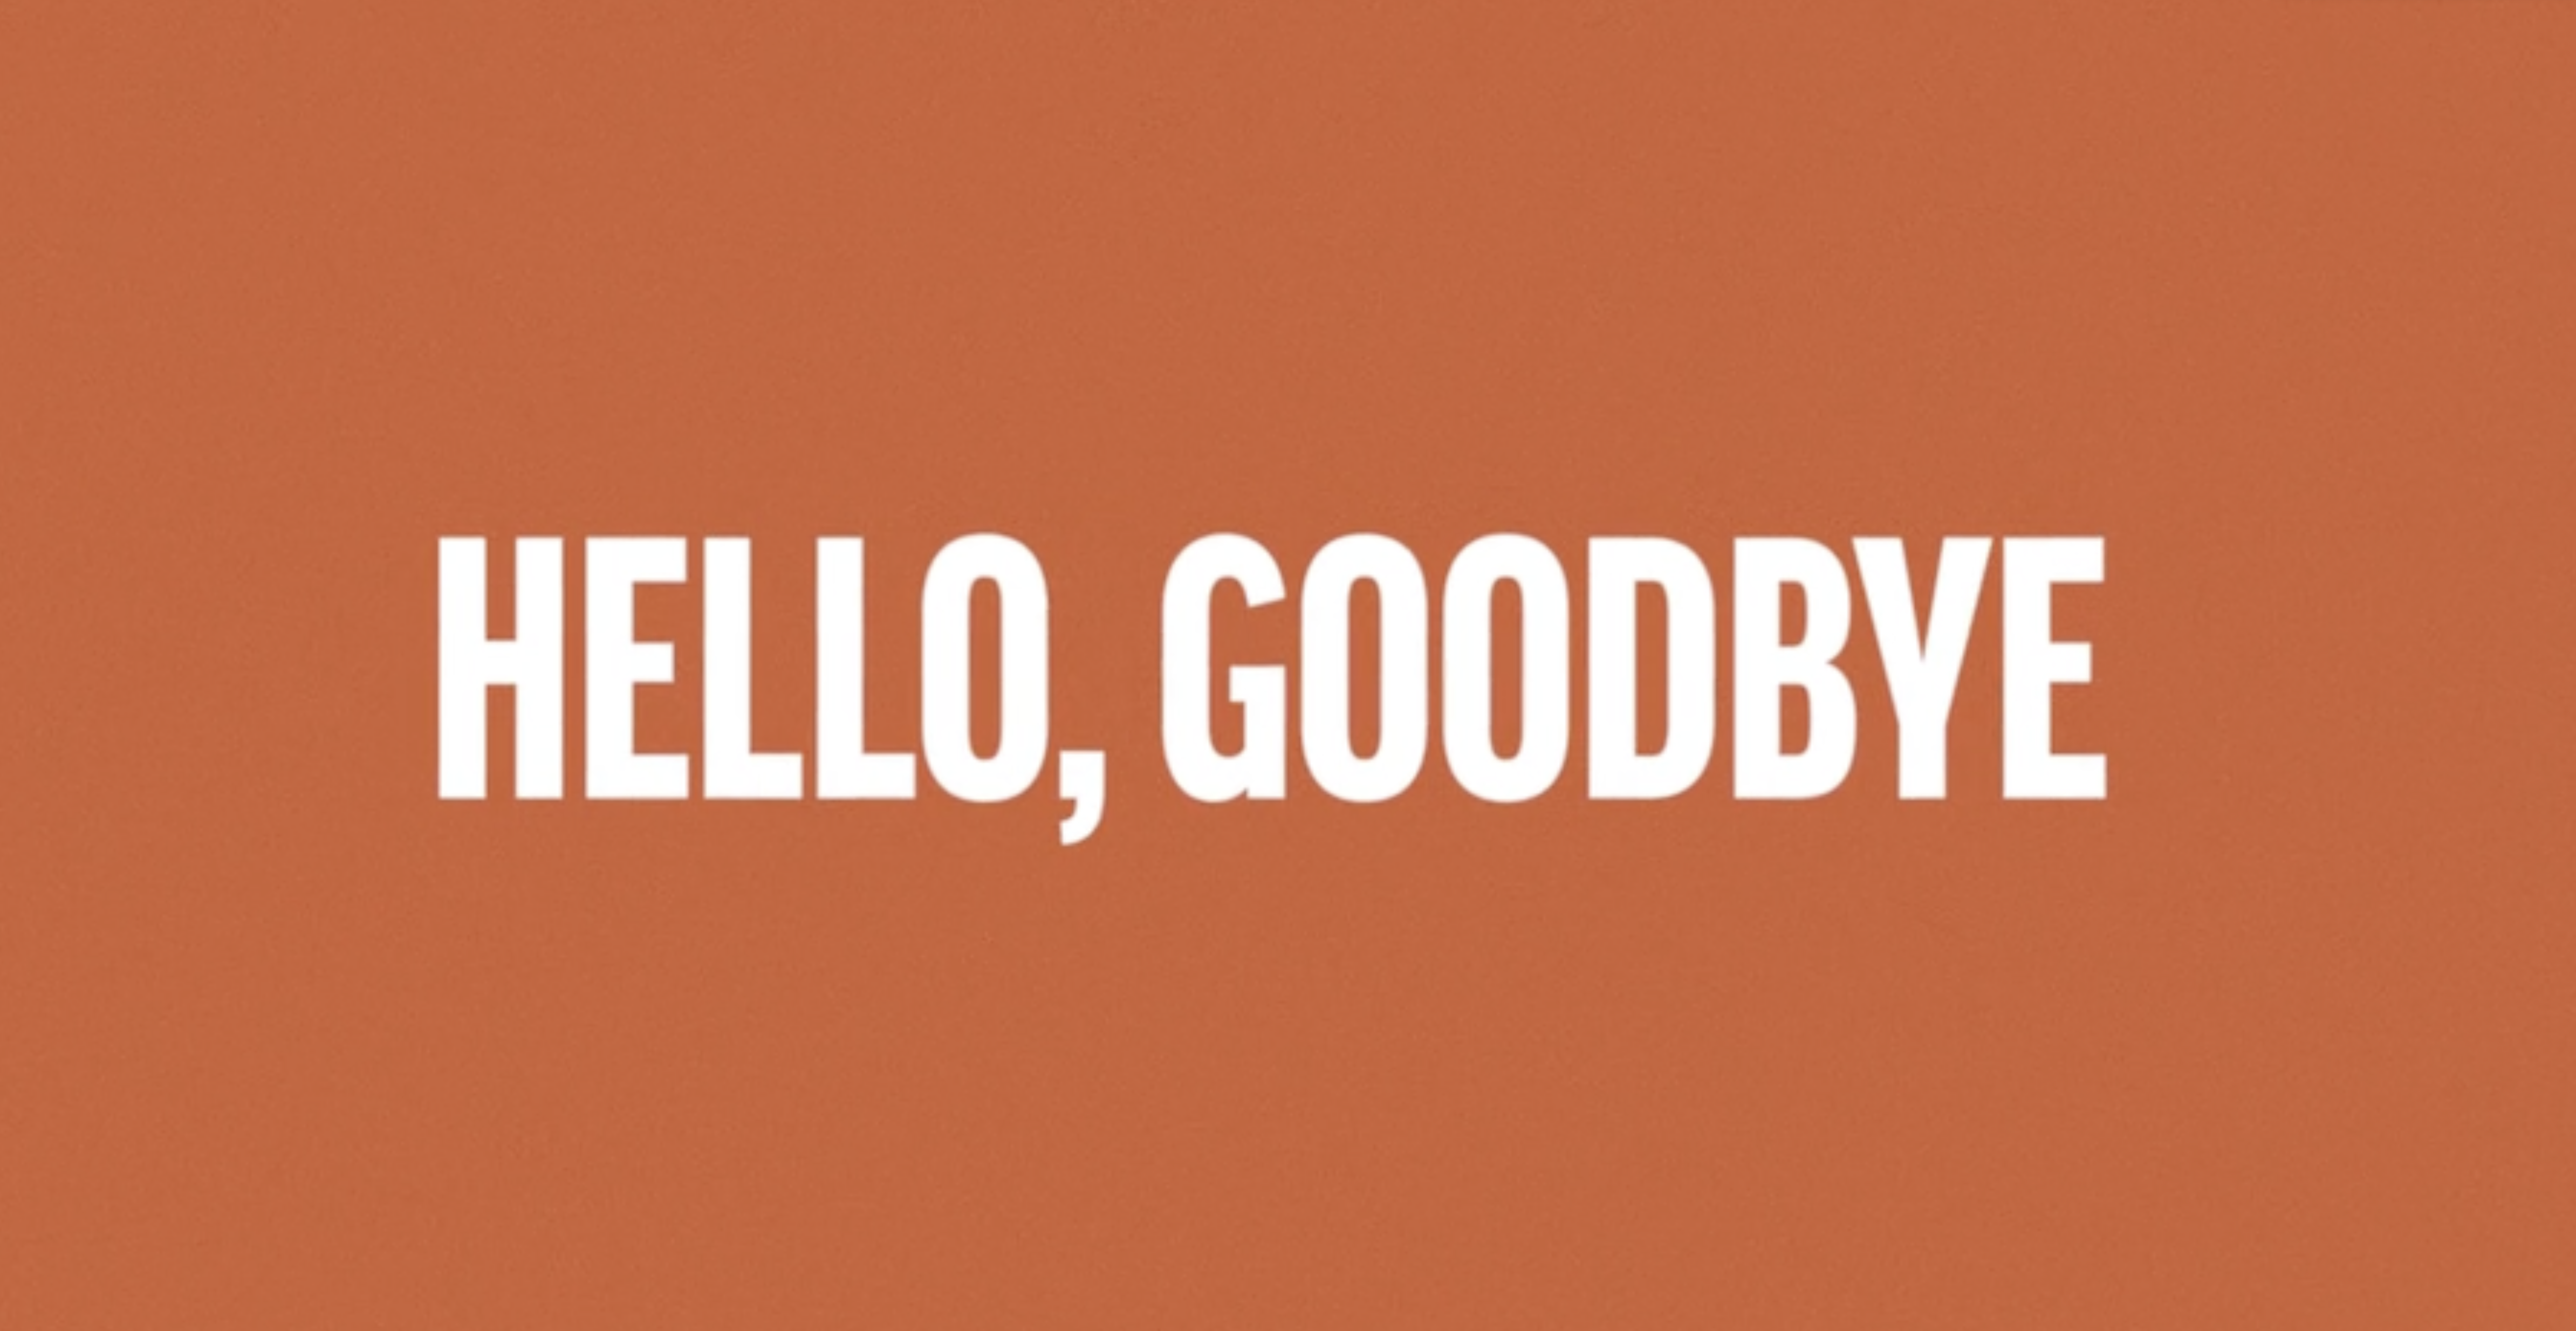 graphic that says Hello, Goodbye against a solid orange background